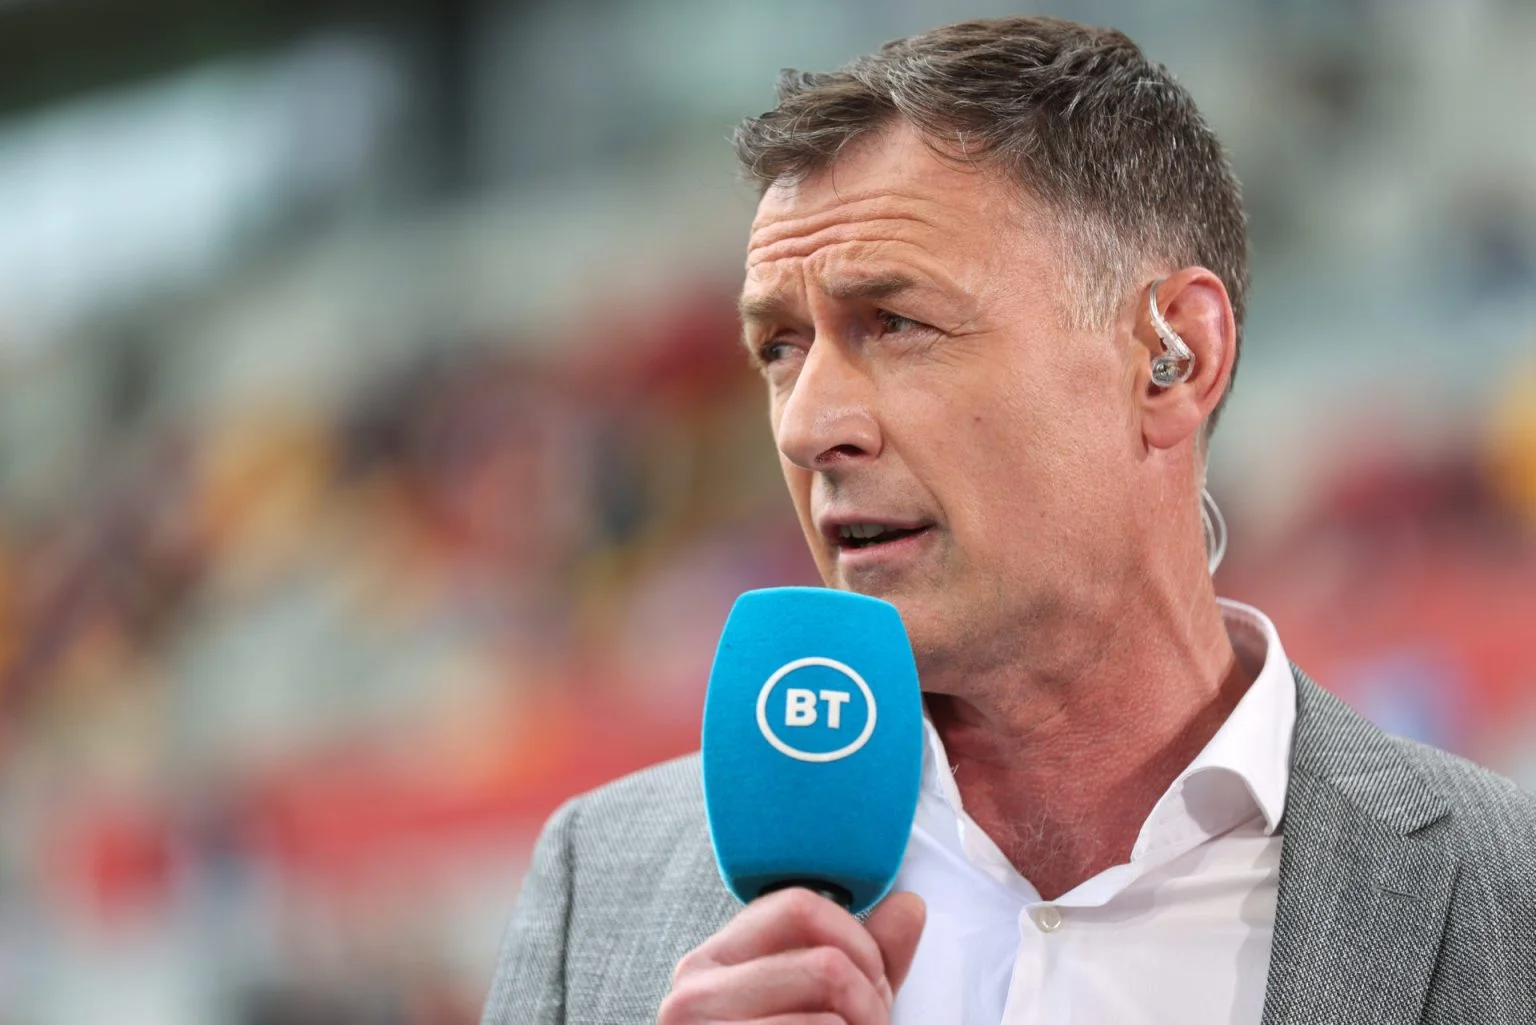 EPL: Chris Sutton predicts scores for Newcastle vs Liverpool, Man Utd, Arsenal, other fixtures